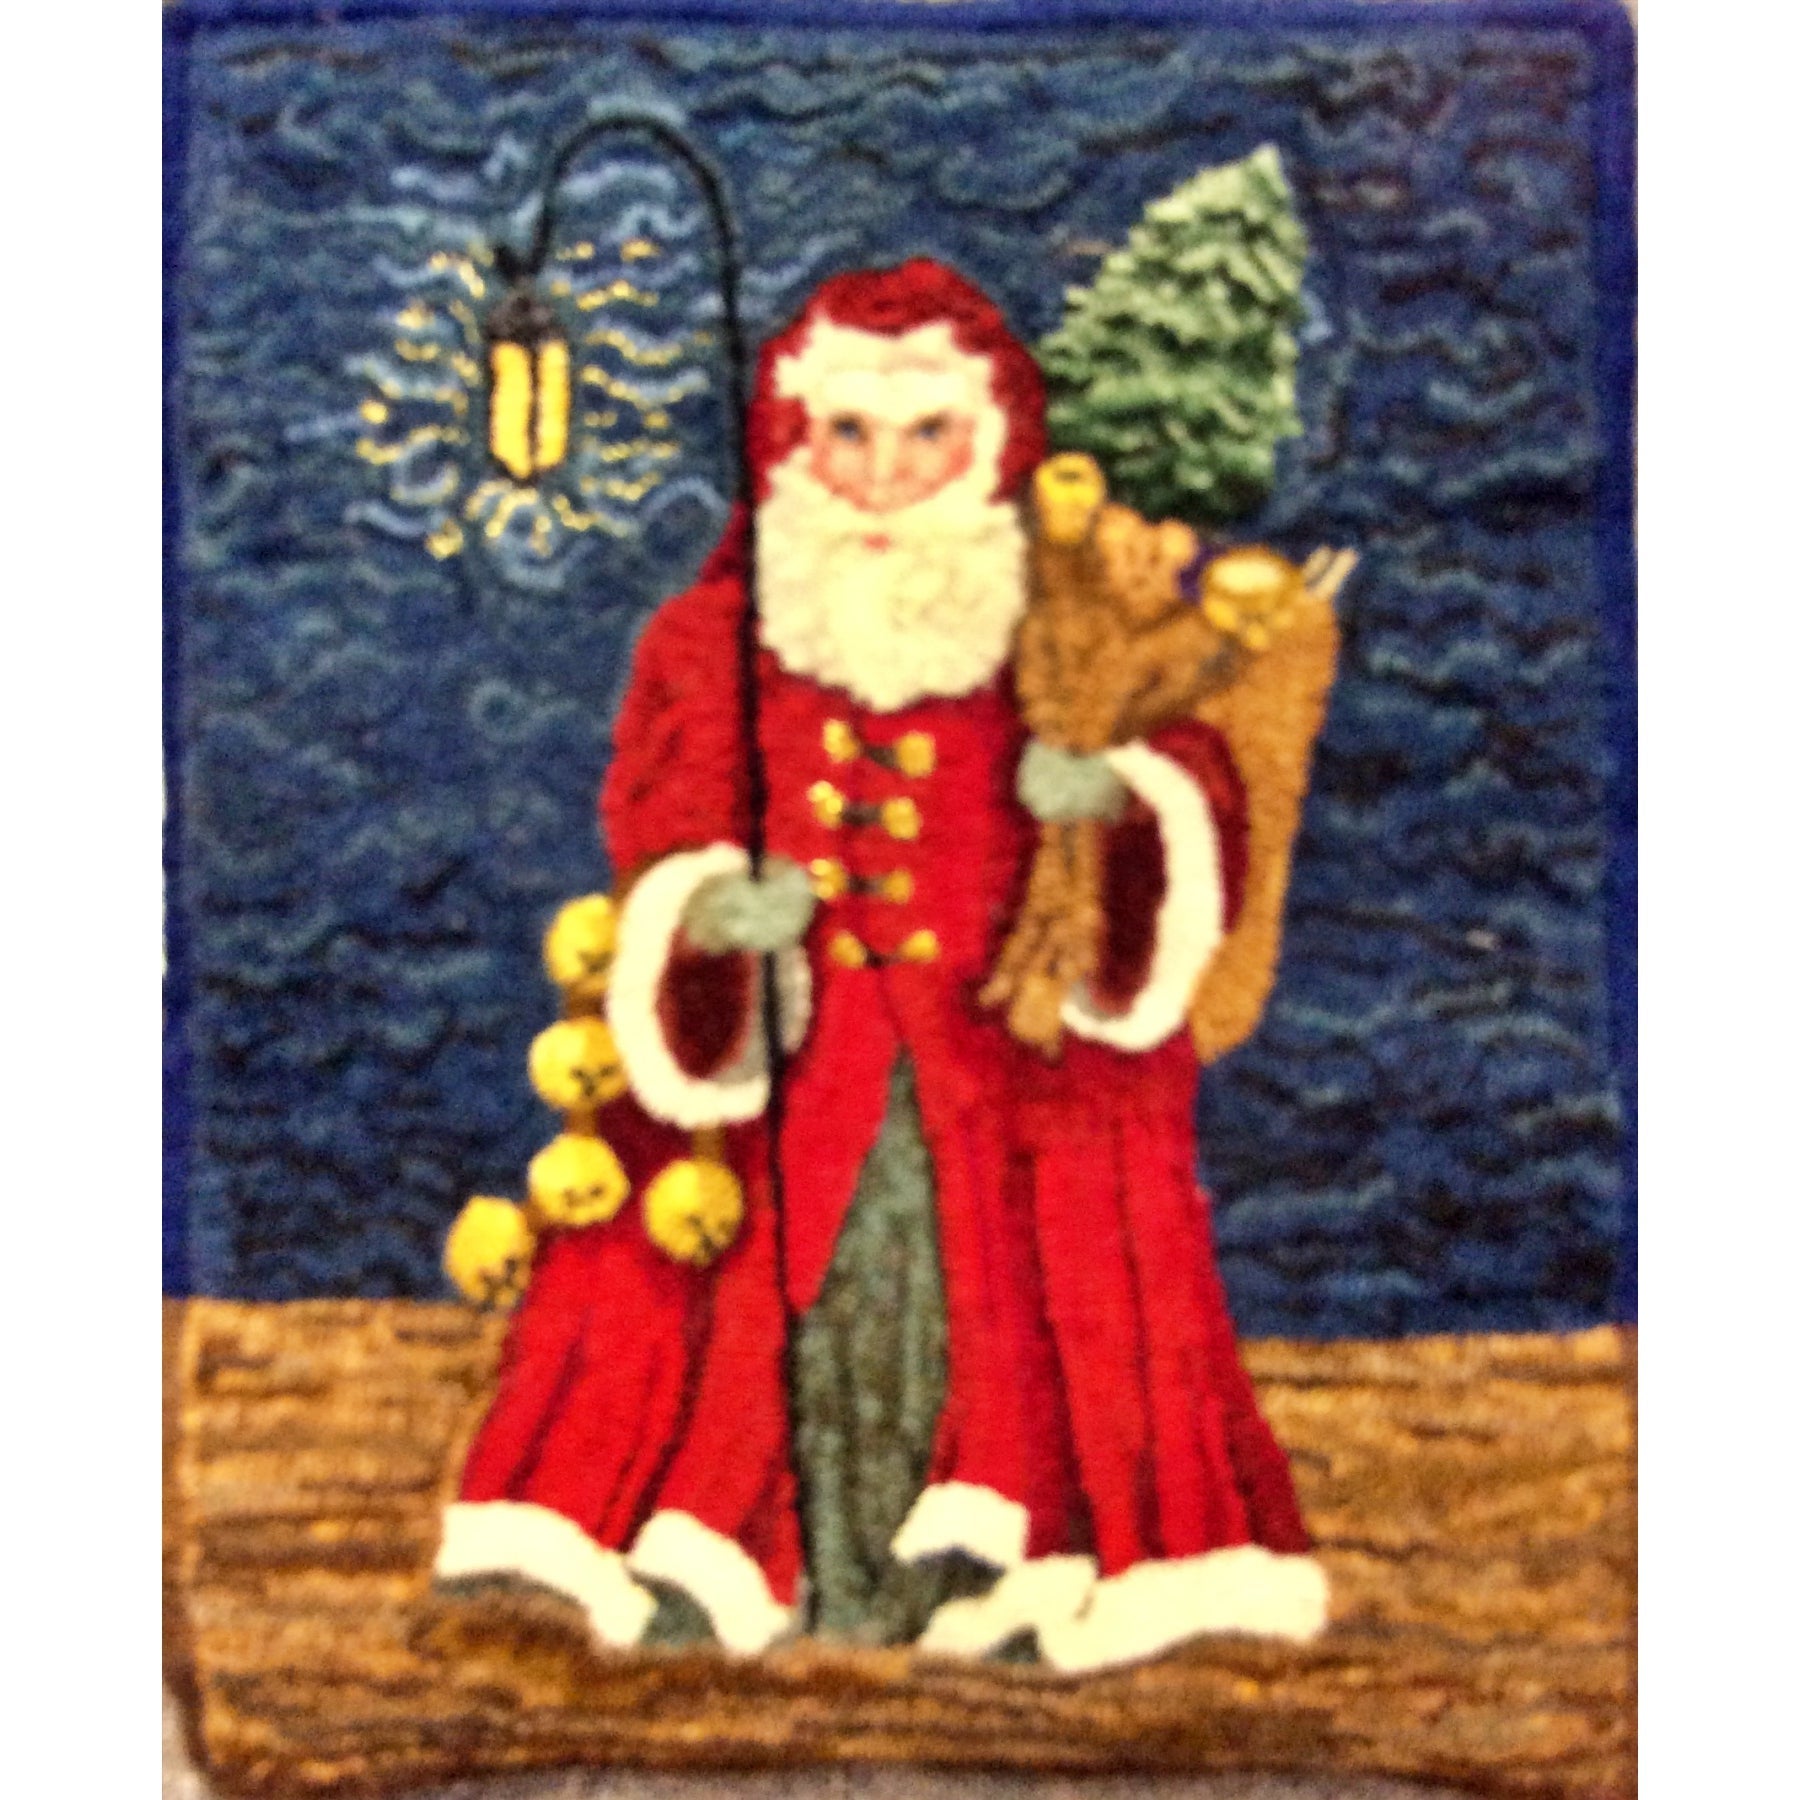 Father Christmas, rug hooked by Vivily Powers